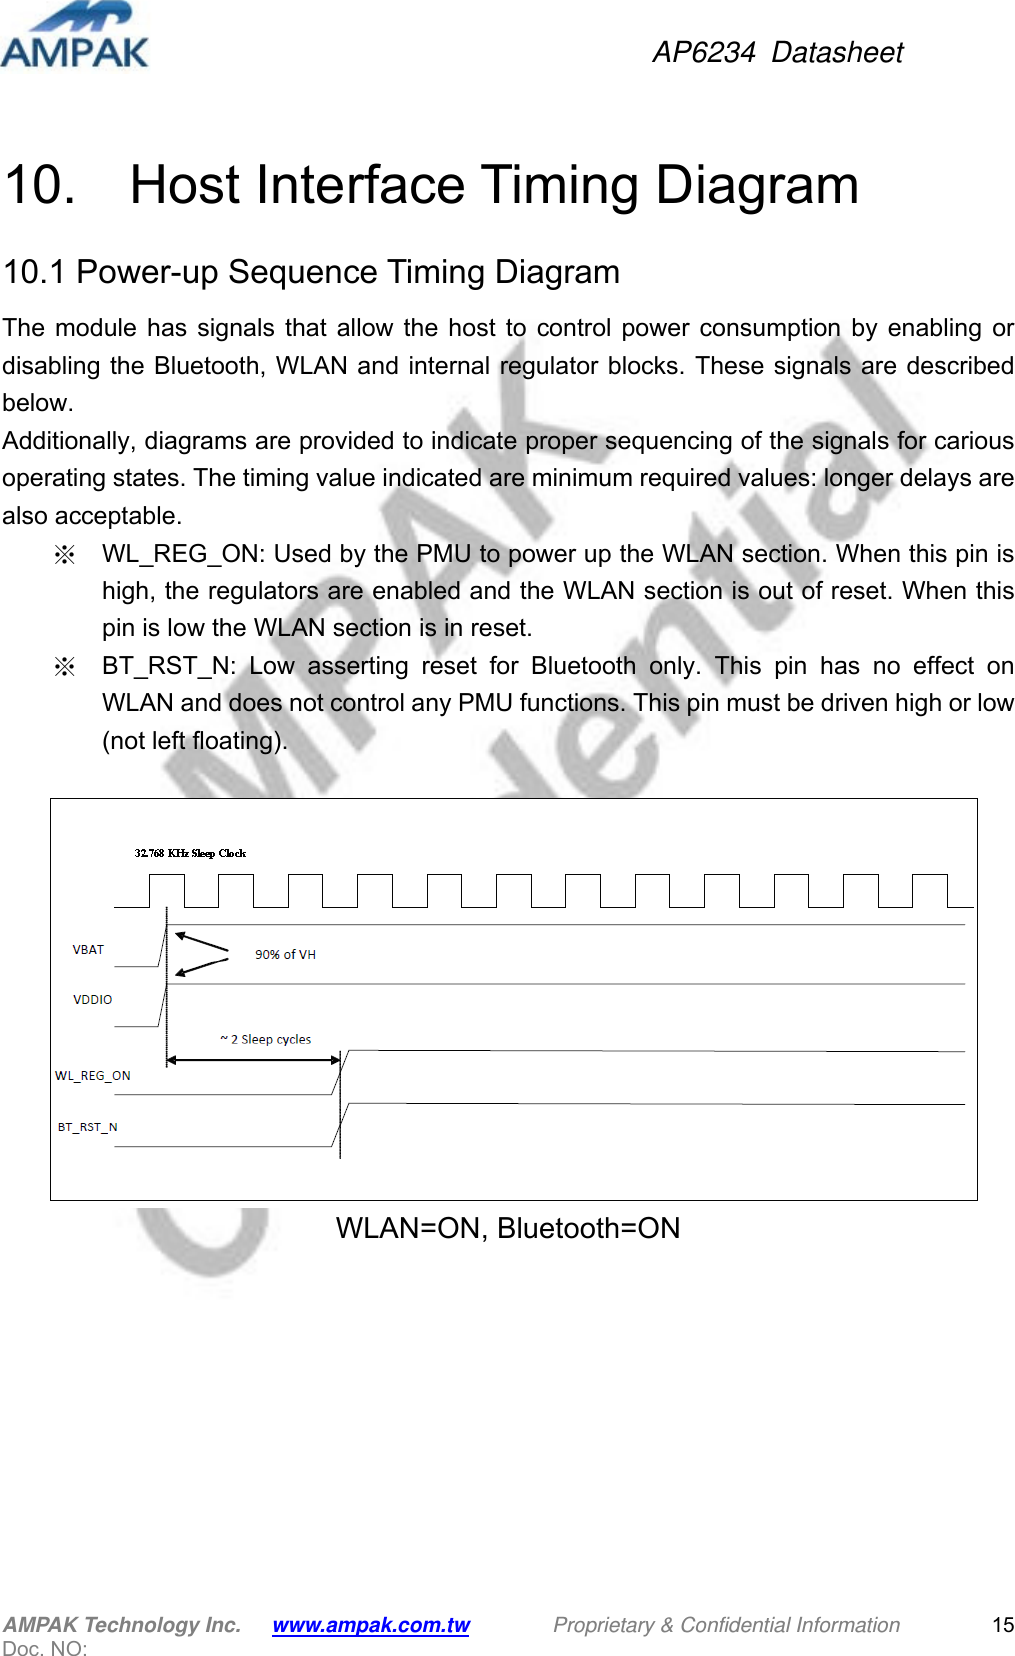 AP6234 Datasheet AMPAK Technology Inc.      www.ampak.com.tw        Proprietary &amp; Confidential Information       Doc. NO:   15 10.    Host Interface Timing Diagram 10.1 Power-up Sequence Timing Diagram The module has signals that allow the host to control power consumption by enabling or disabling the Bluetooth, WLAN and internal regulator blocks. These signals are described below. Additionally, diagrams are provided to indicate proper sequencing of the signals for carious operating states. The timing value indicated are minimum required values: longer delays are also acceptable. ※  WL_REG_ON: Used by the PMU to power up the WLAN section. When this pin is high, the regulators are enabled and the WLAN section is out of reset. When this pin is low the WLAN section is in reset.   ※  BT_RST_N: Low asserting reset for Bluetooth only. This pin has no effect on WLAN and does not control any PMU functions. This pin must be driven high or low (not left floating).    WLAN=ON, Bluetooth=ON  